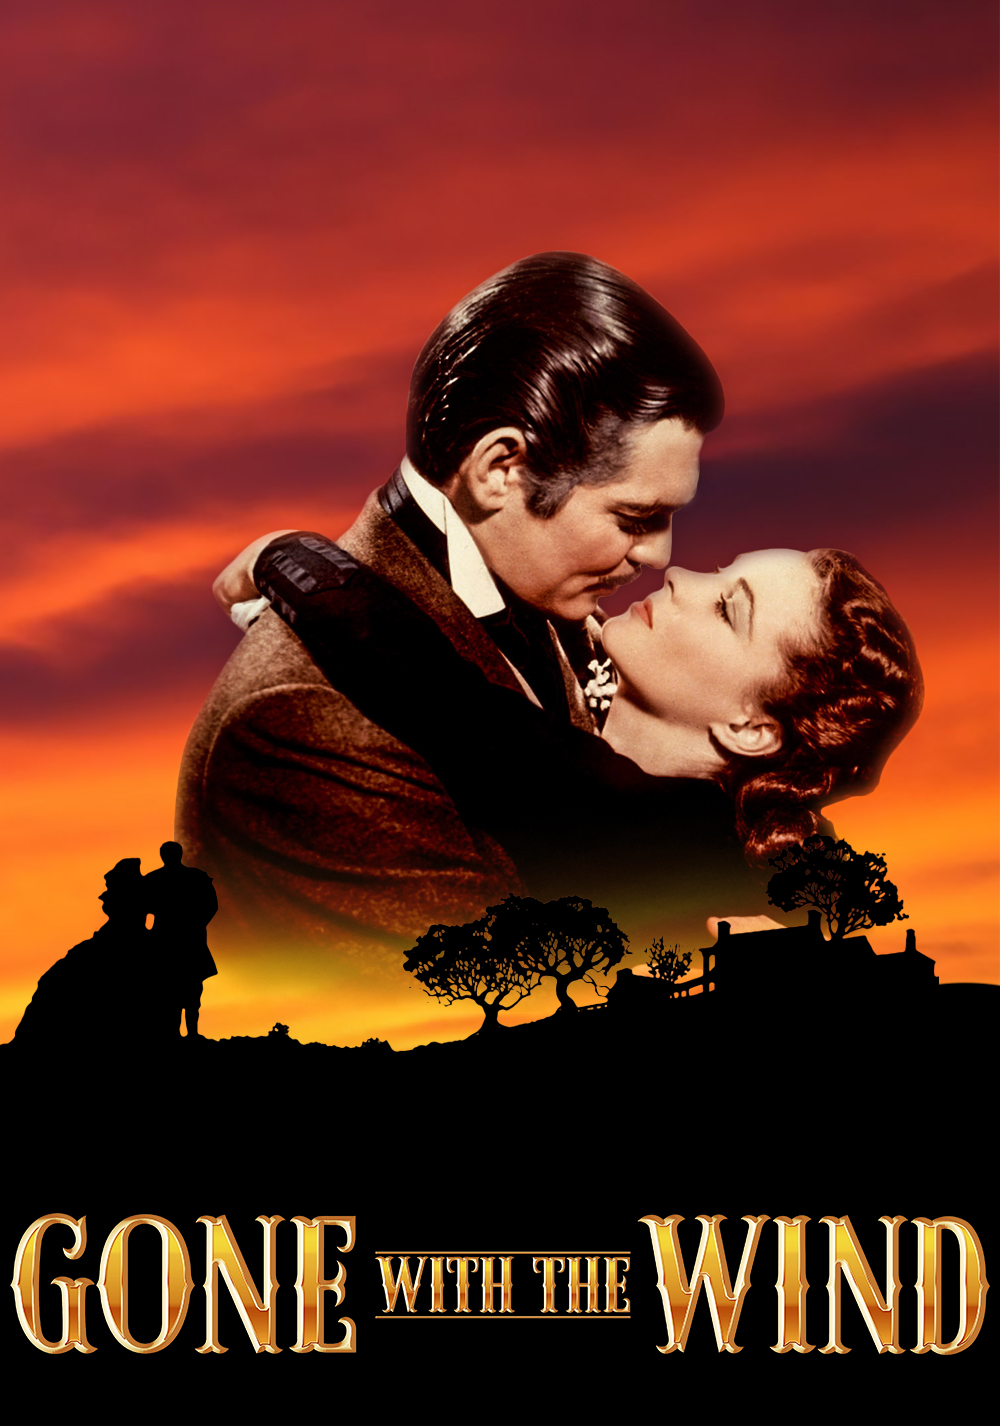 Friday Night at the Movies – Gone with the Wind